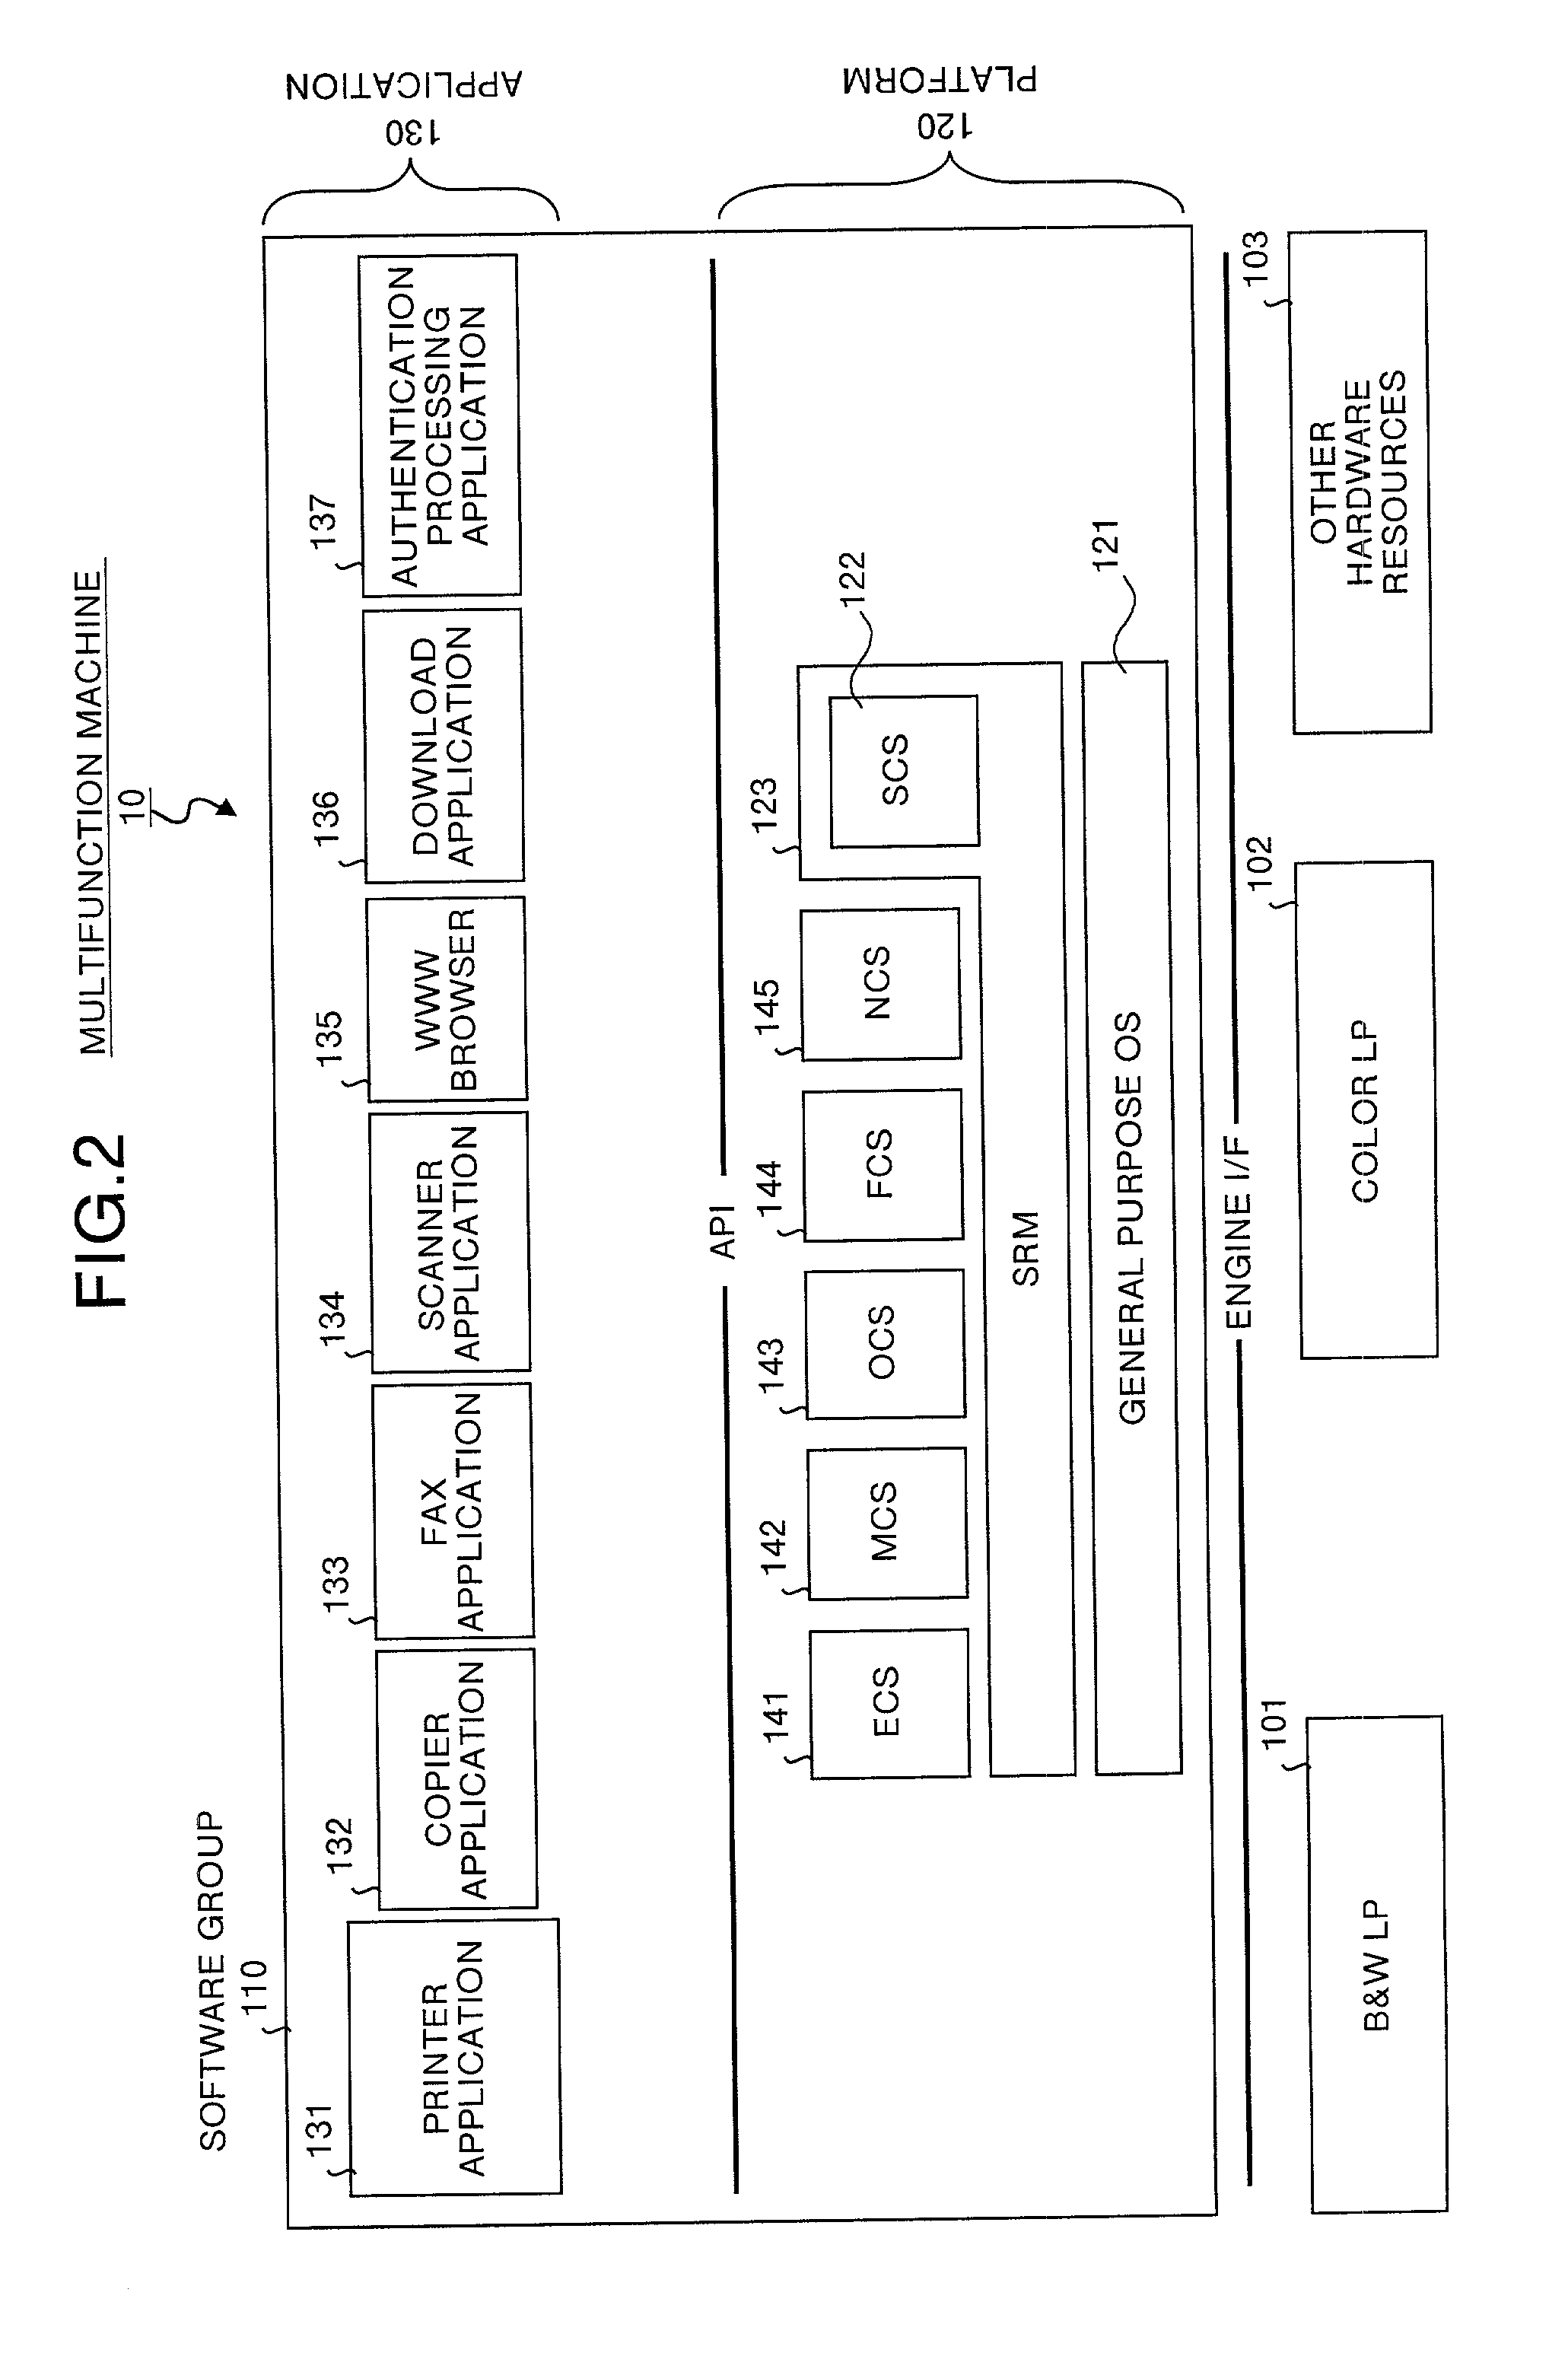 Image formation system, software acquisition method, and computer product